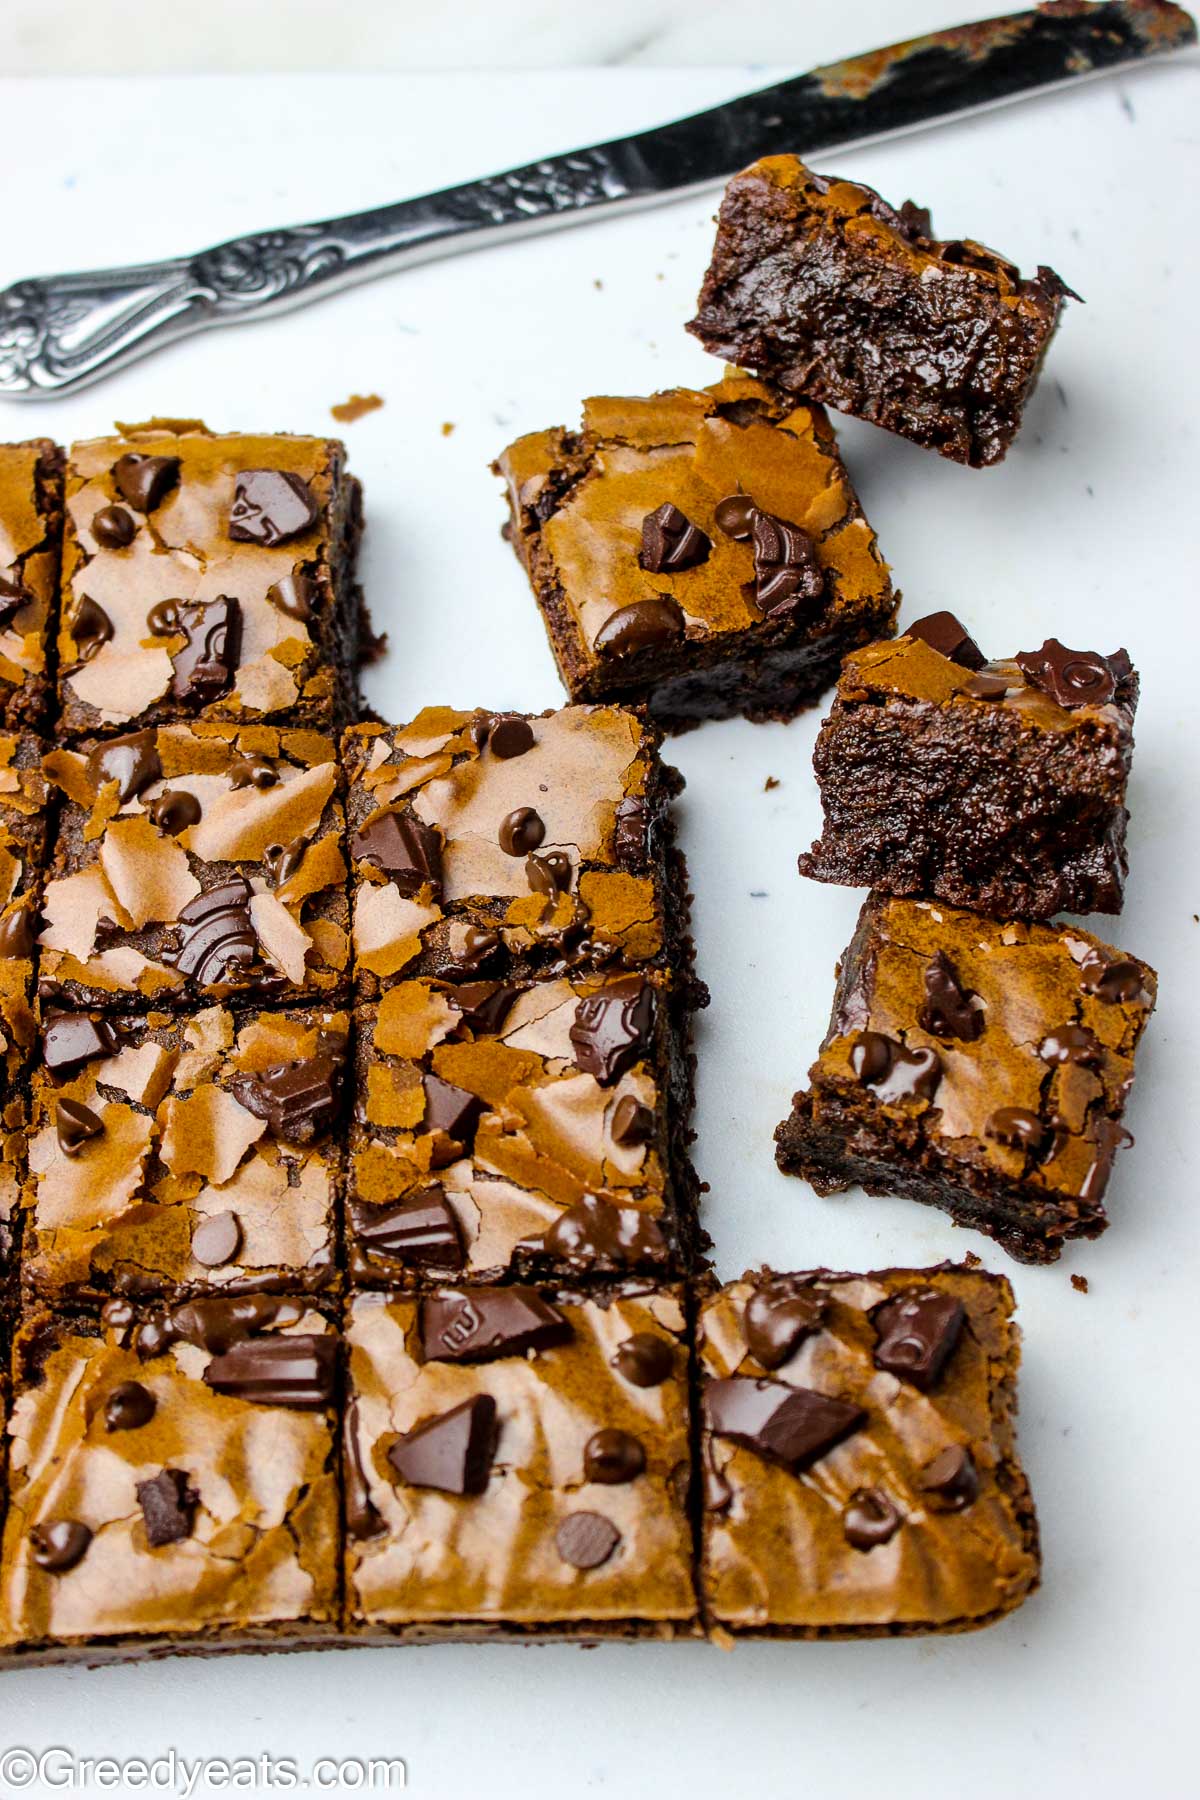 Best brownie recipe that is chewy, fudgy and tastes just as good as a box mixed one.